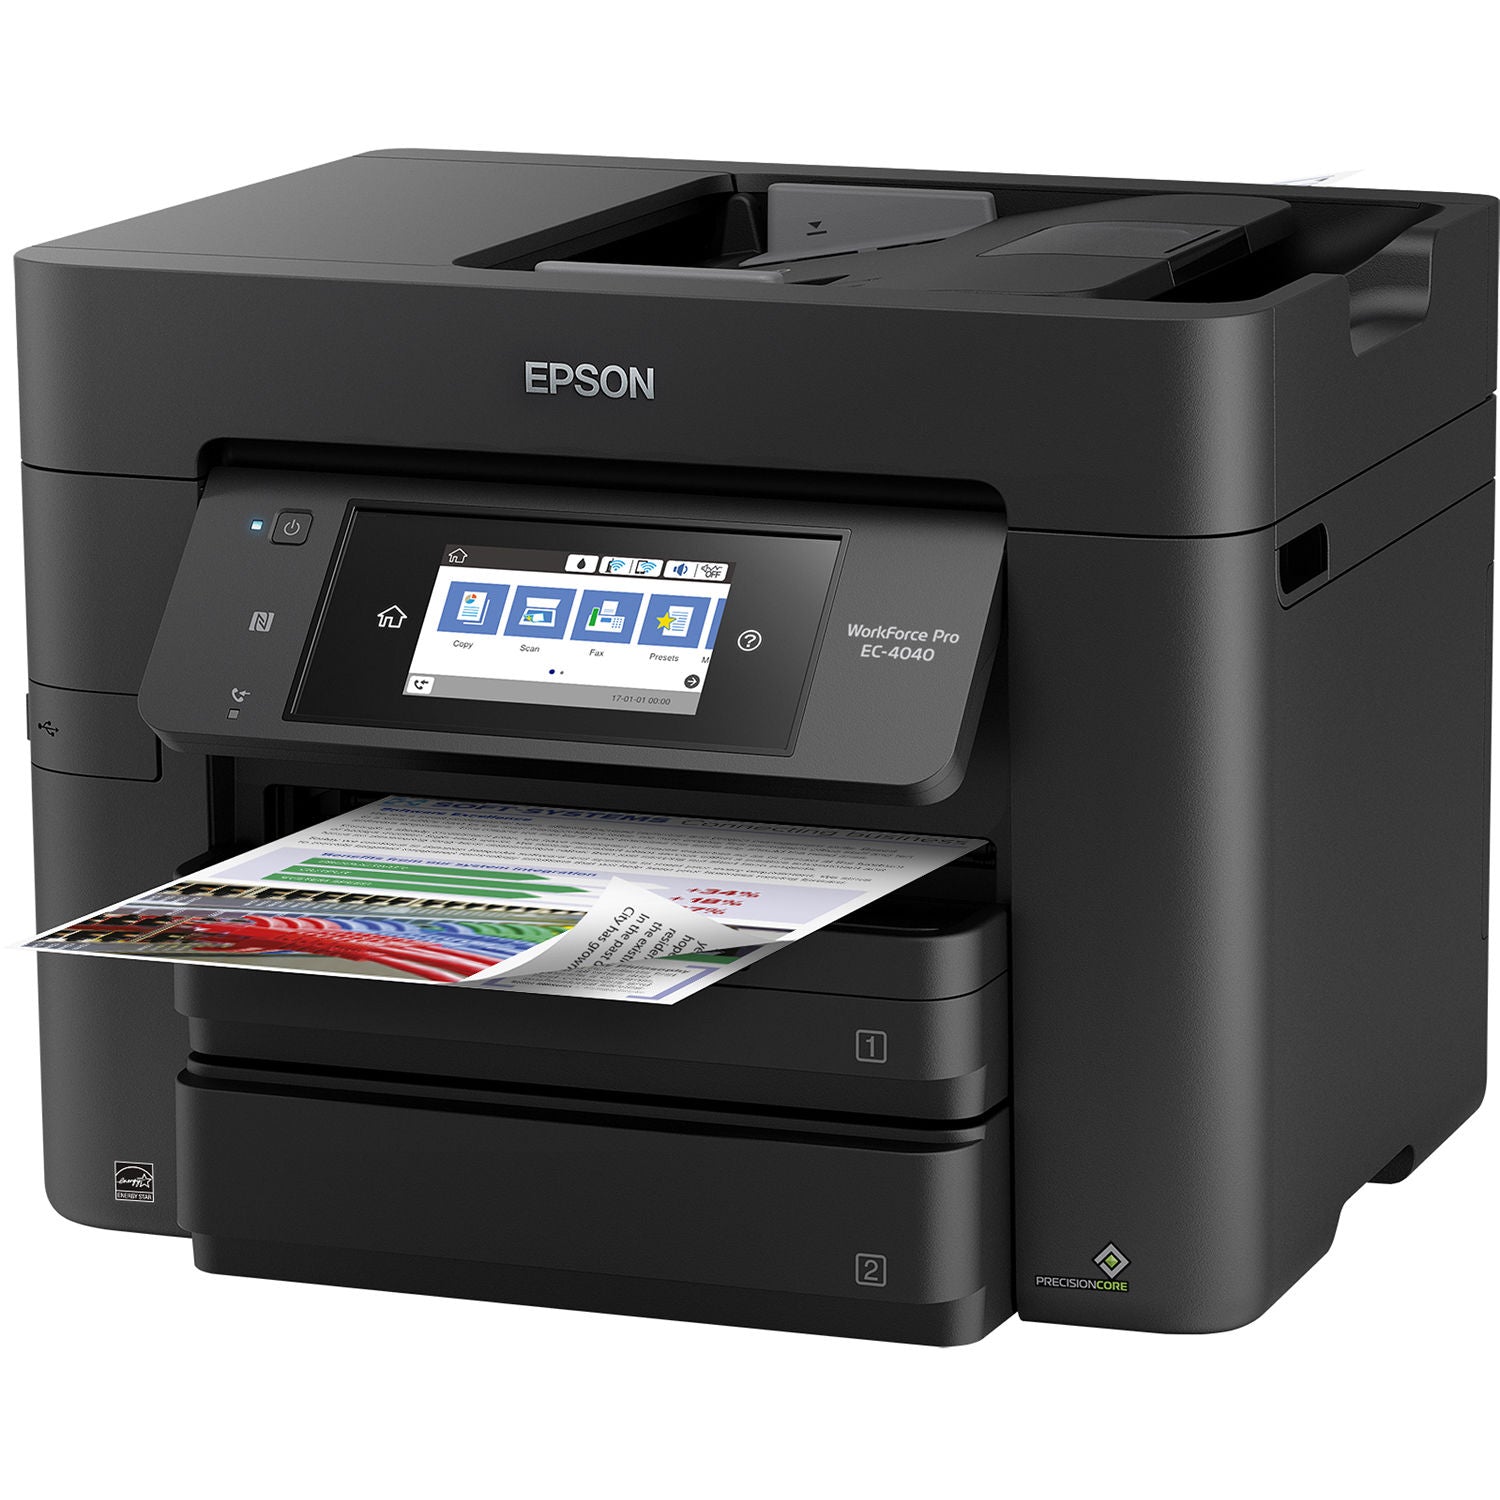 Absolute Toner New Epson High-Speed WorkForce Pro EC-4040 Color Inkjet Multifunction Printer Copier Scanner, Fax With Two Trays And Color Touchscreen, C11CF75203 Showroom Color Copier